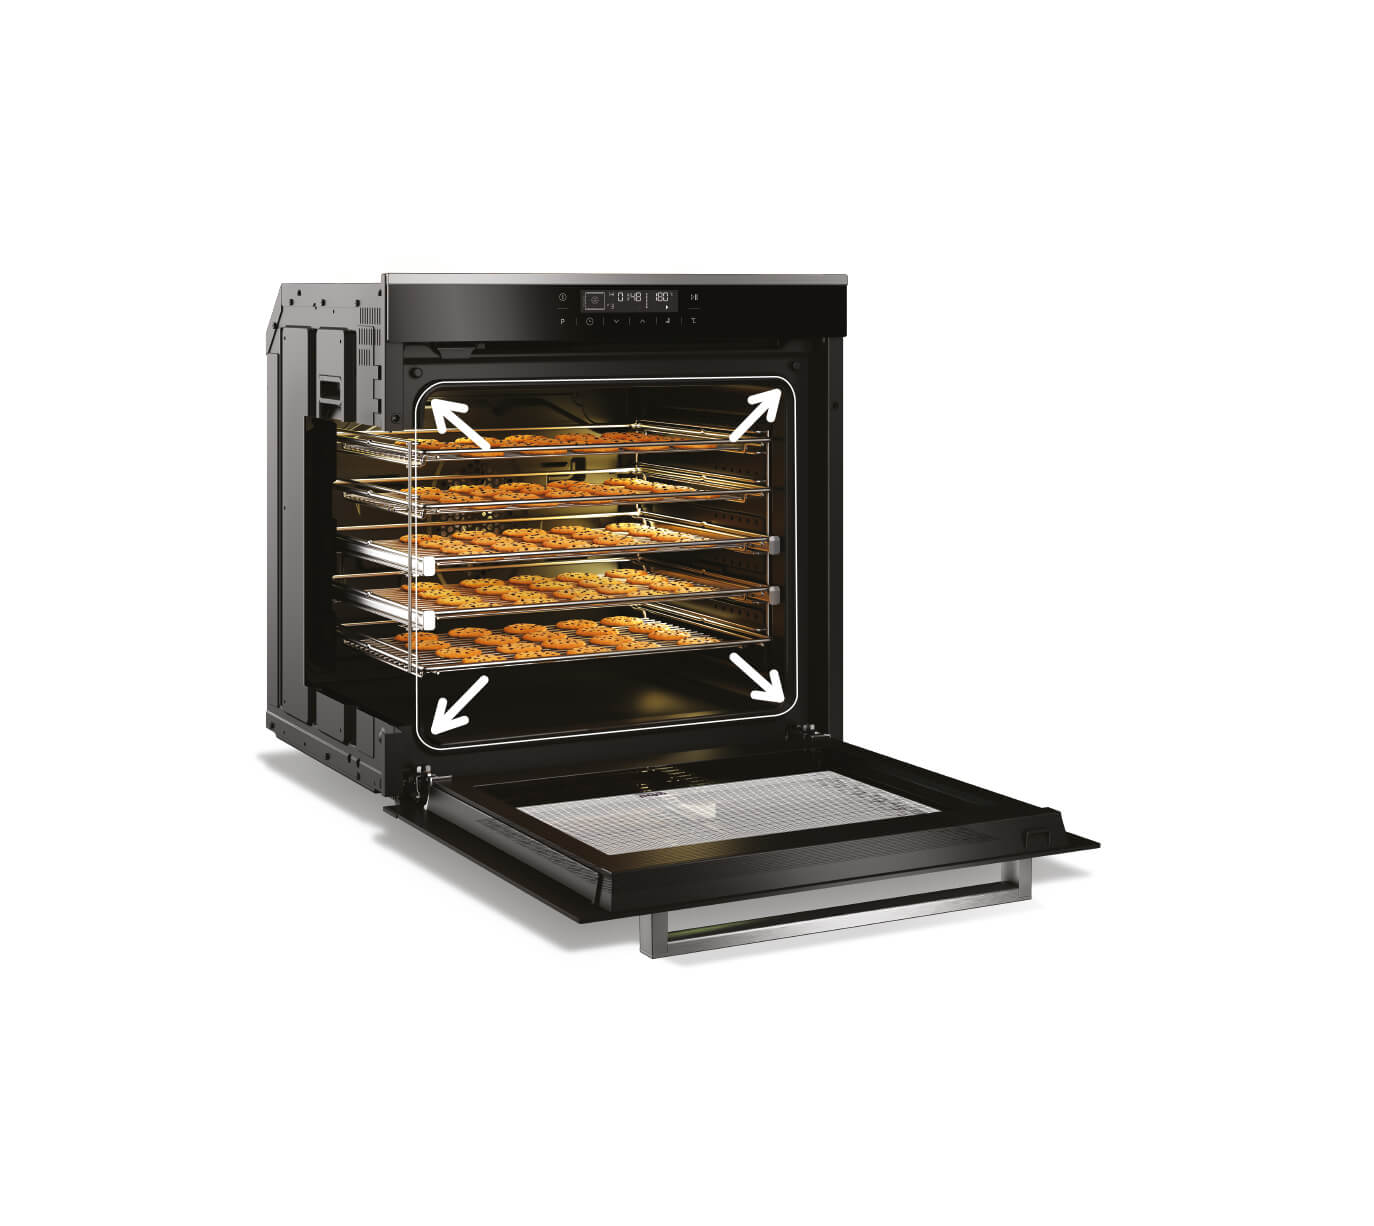 Large 66L Oven Capacity